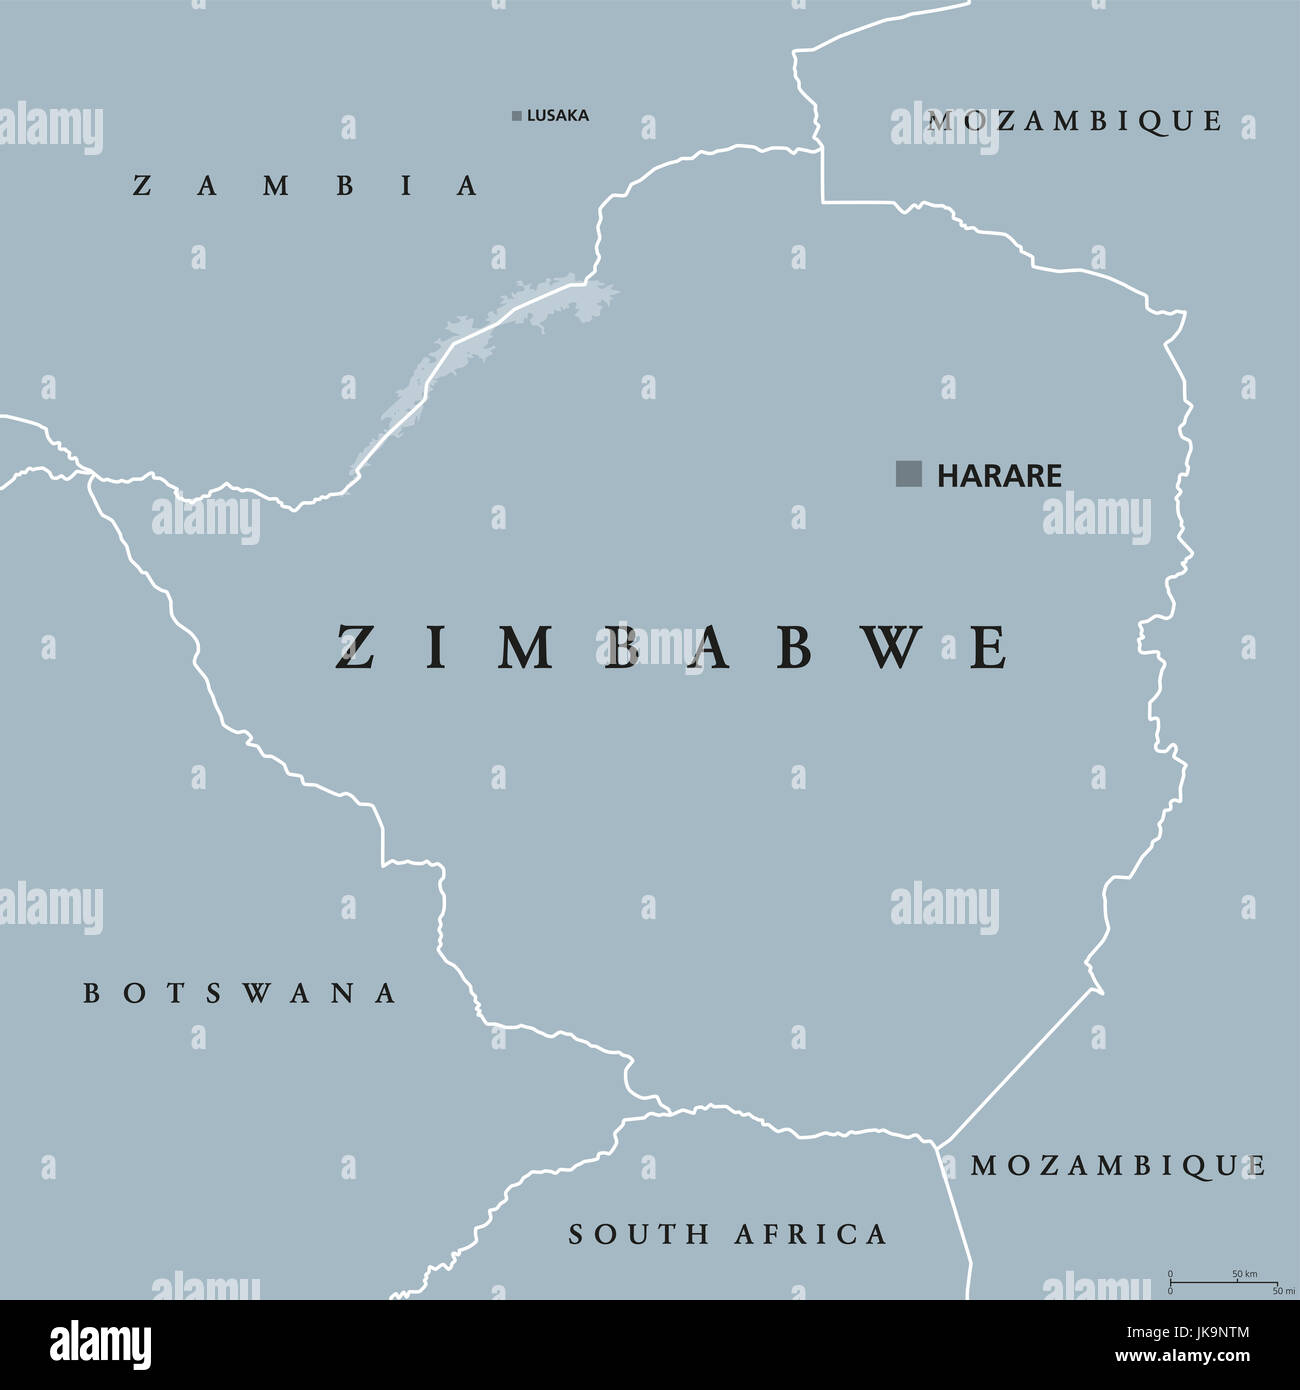 Zimbabwe political map with capital Harare, international borders and neighbors. Republic and landlocked country in South Africa. Stock Photo